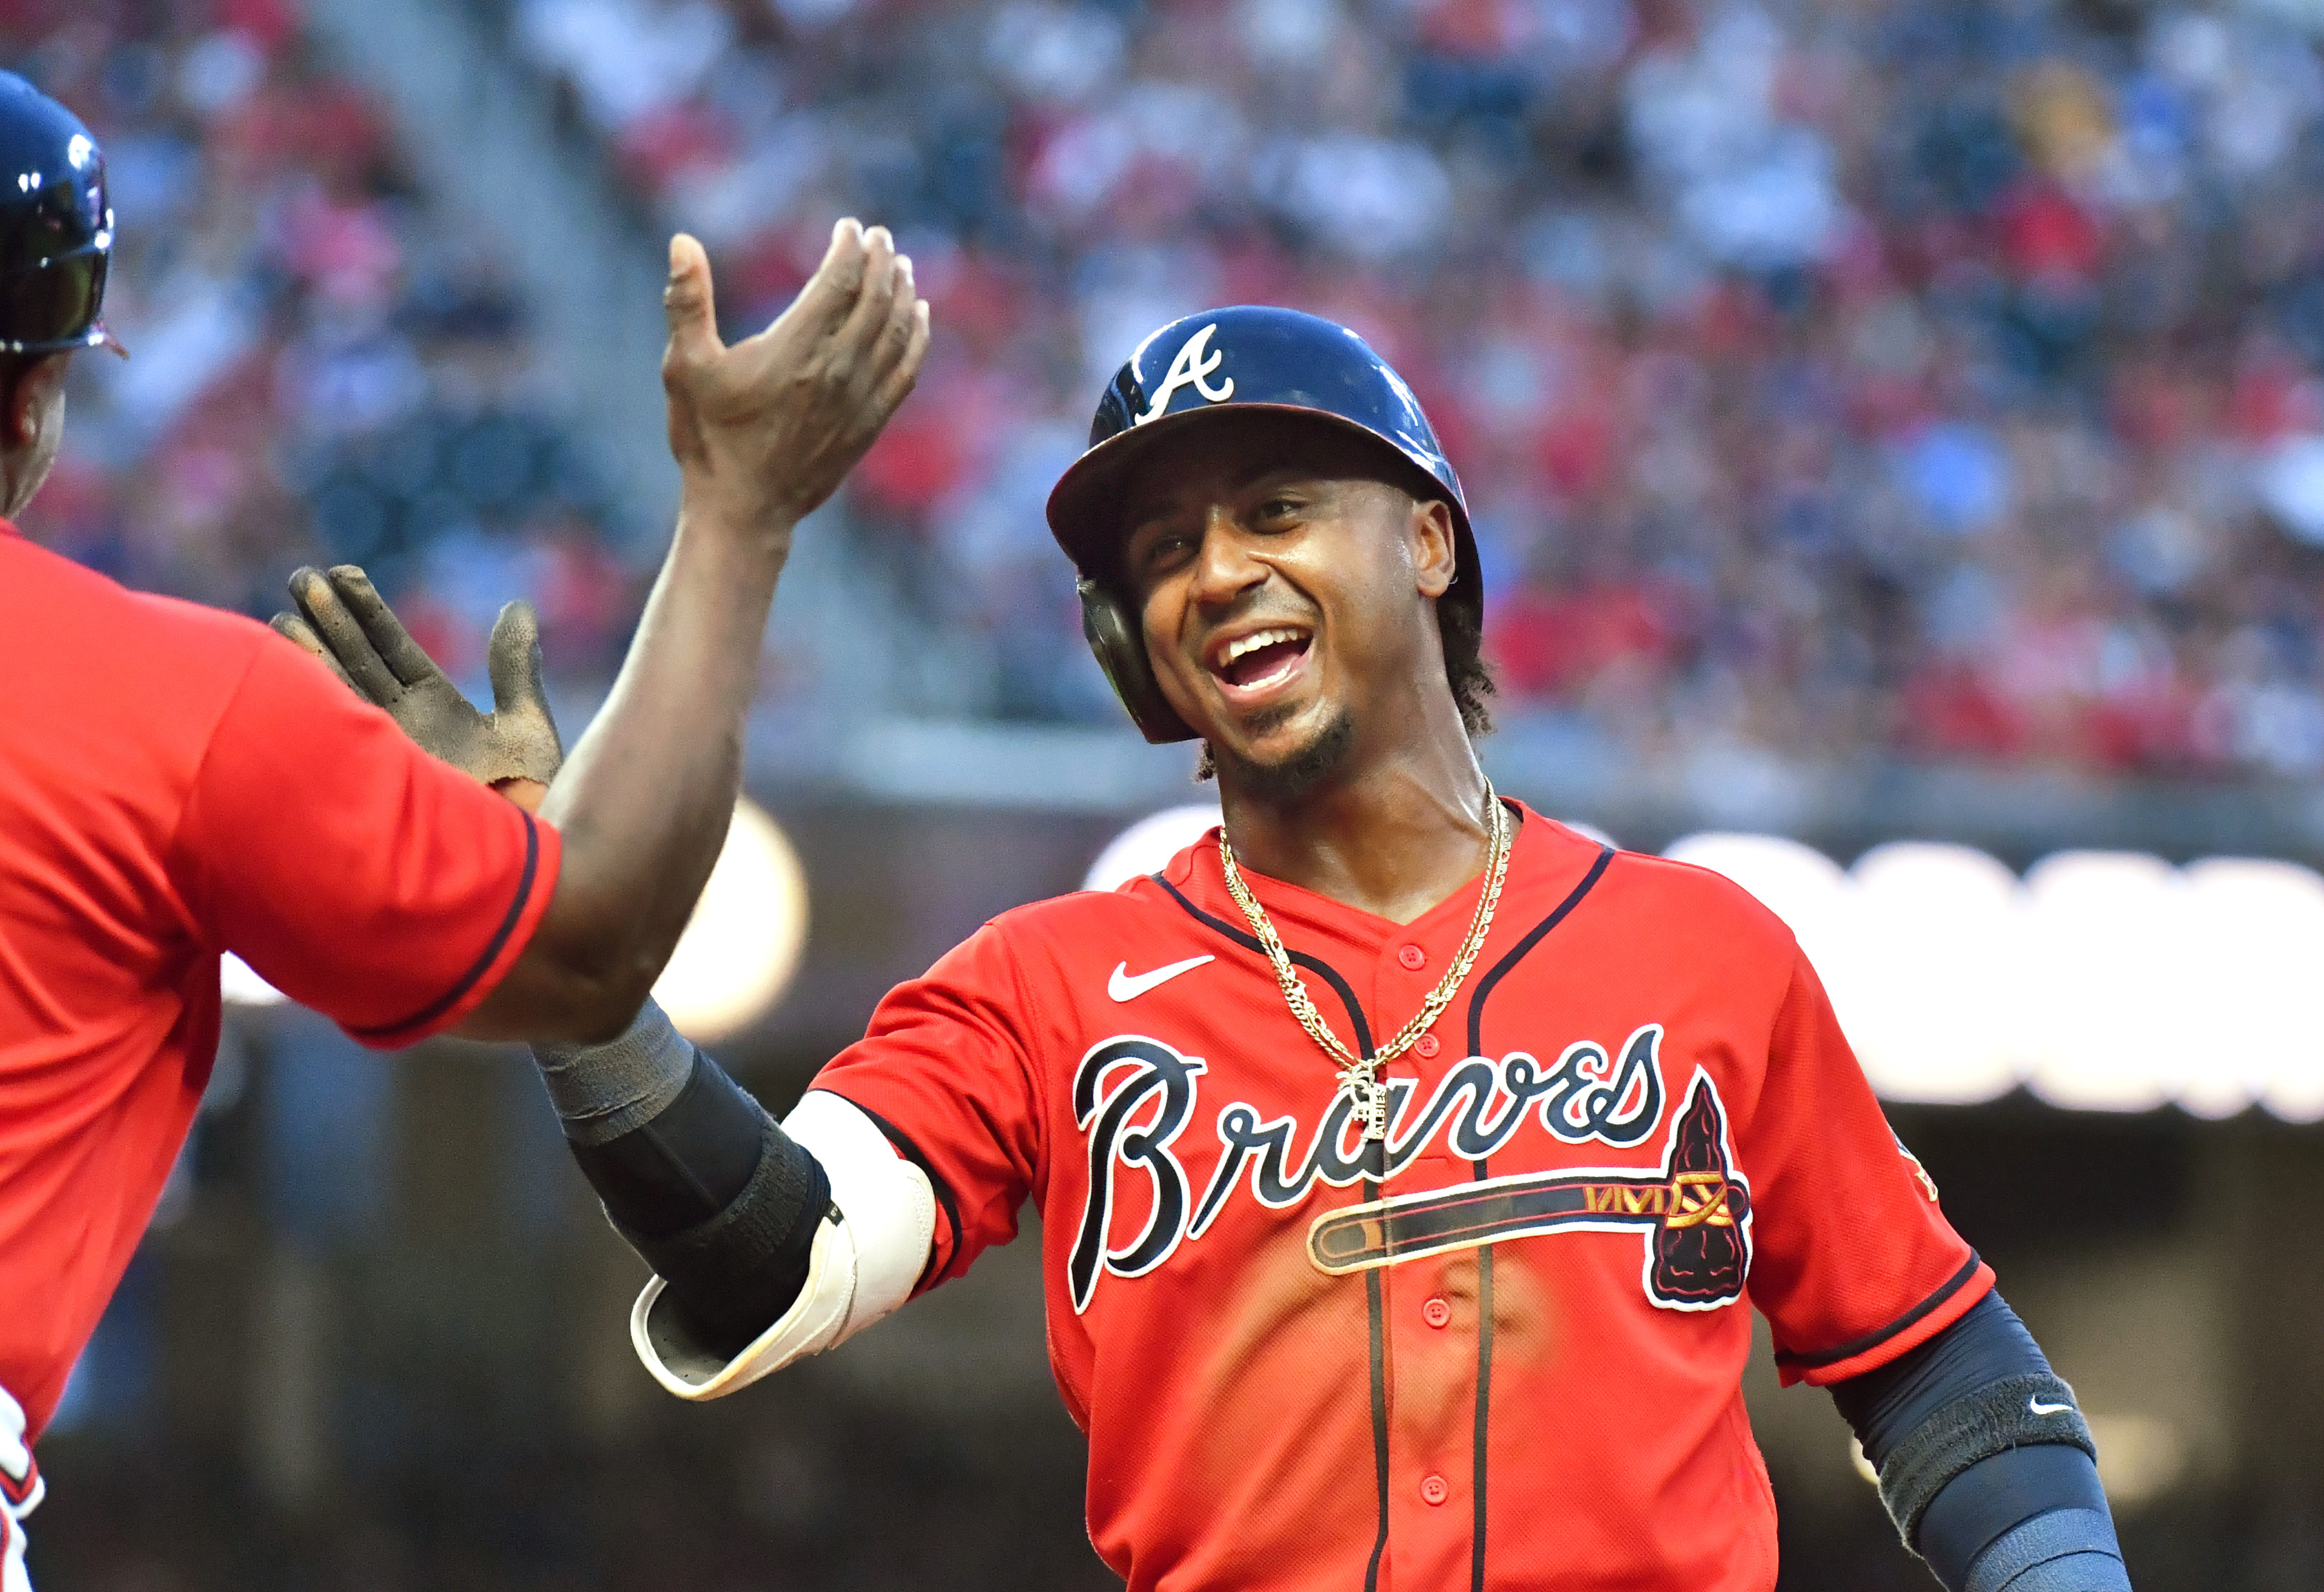 Acuna, Albies are clicking, and the Braves look even more dangerous